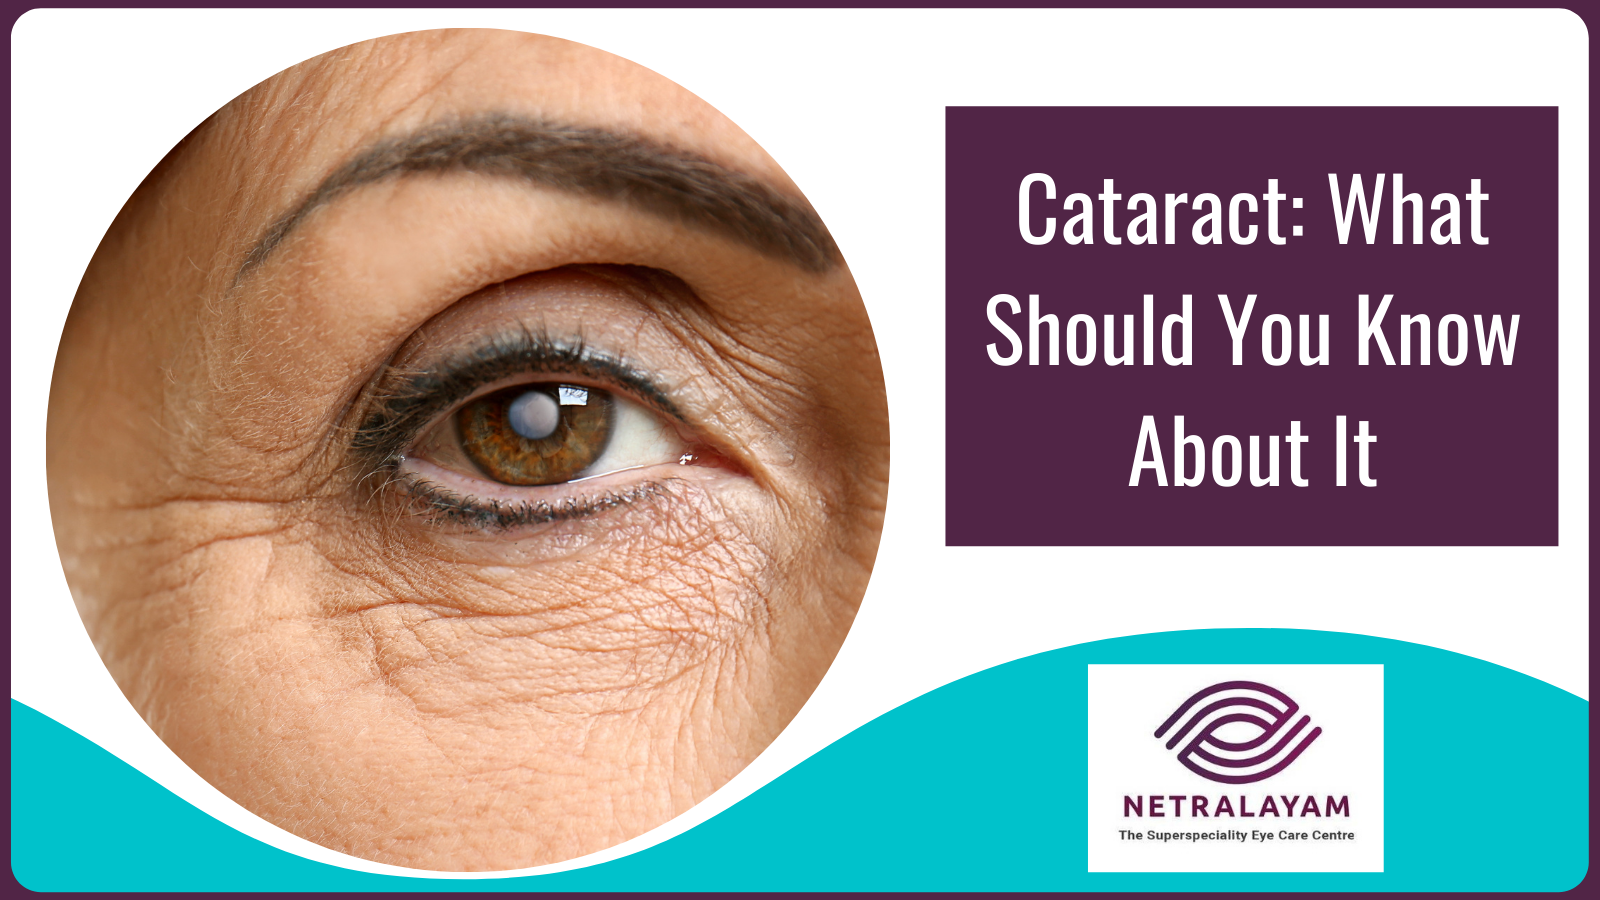 Cataract: What Should You Know About It